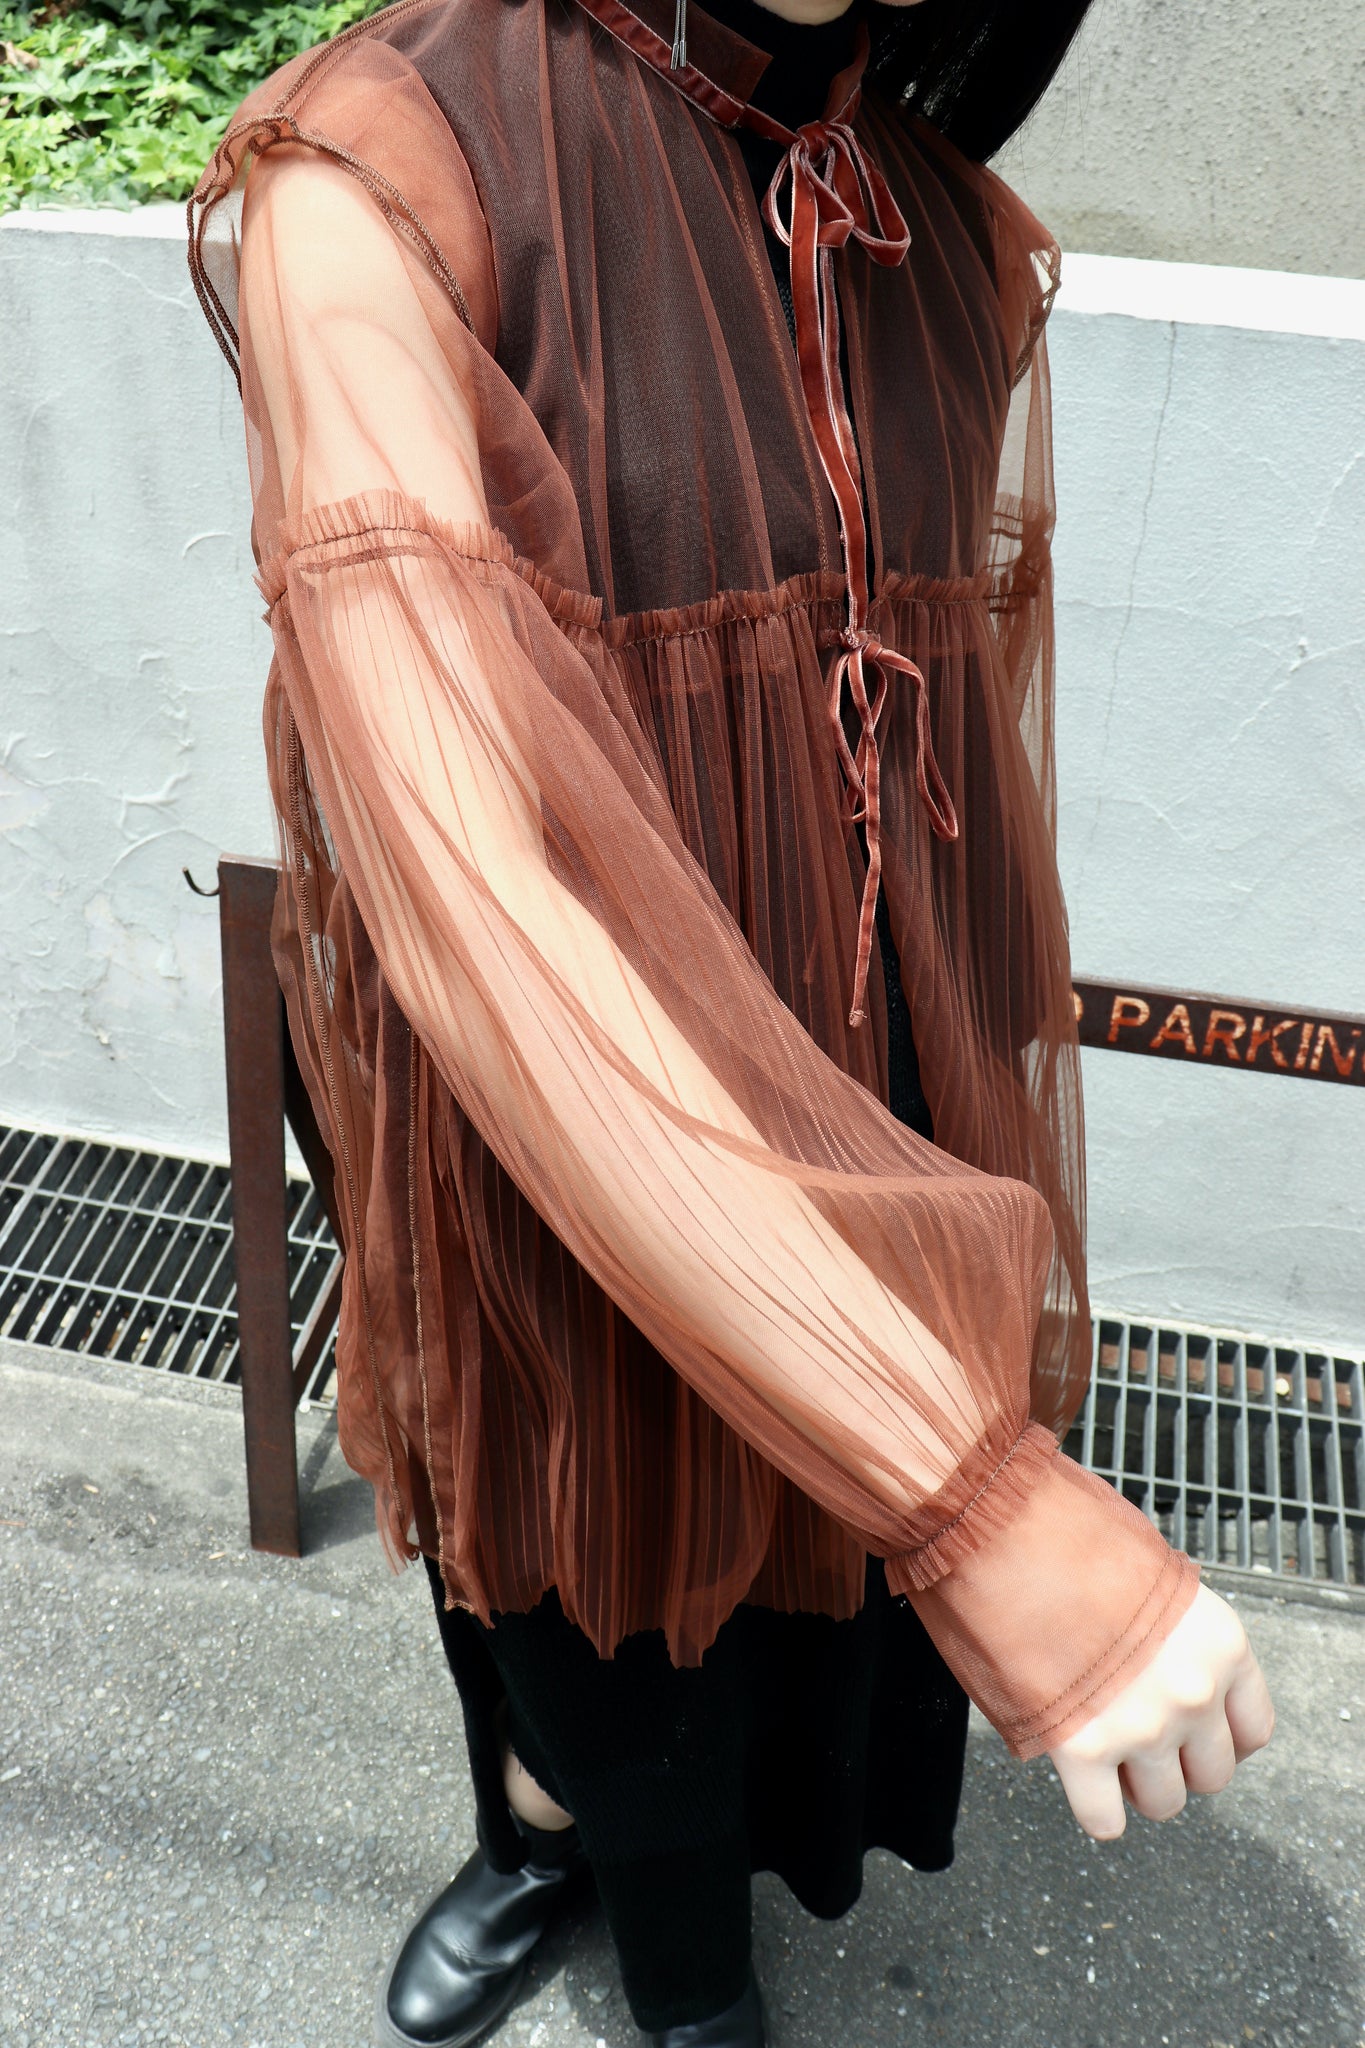 Styling images using Perverze 22SS PLEATS LAYERED SHEER SHIRTS